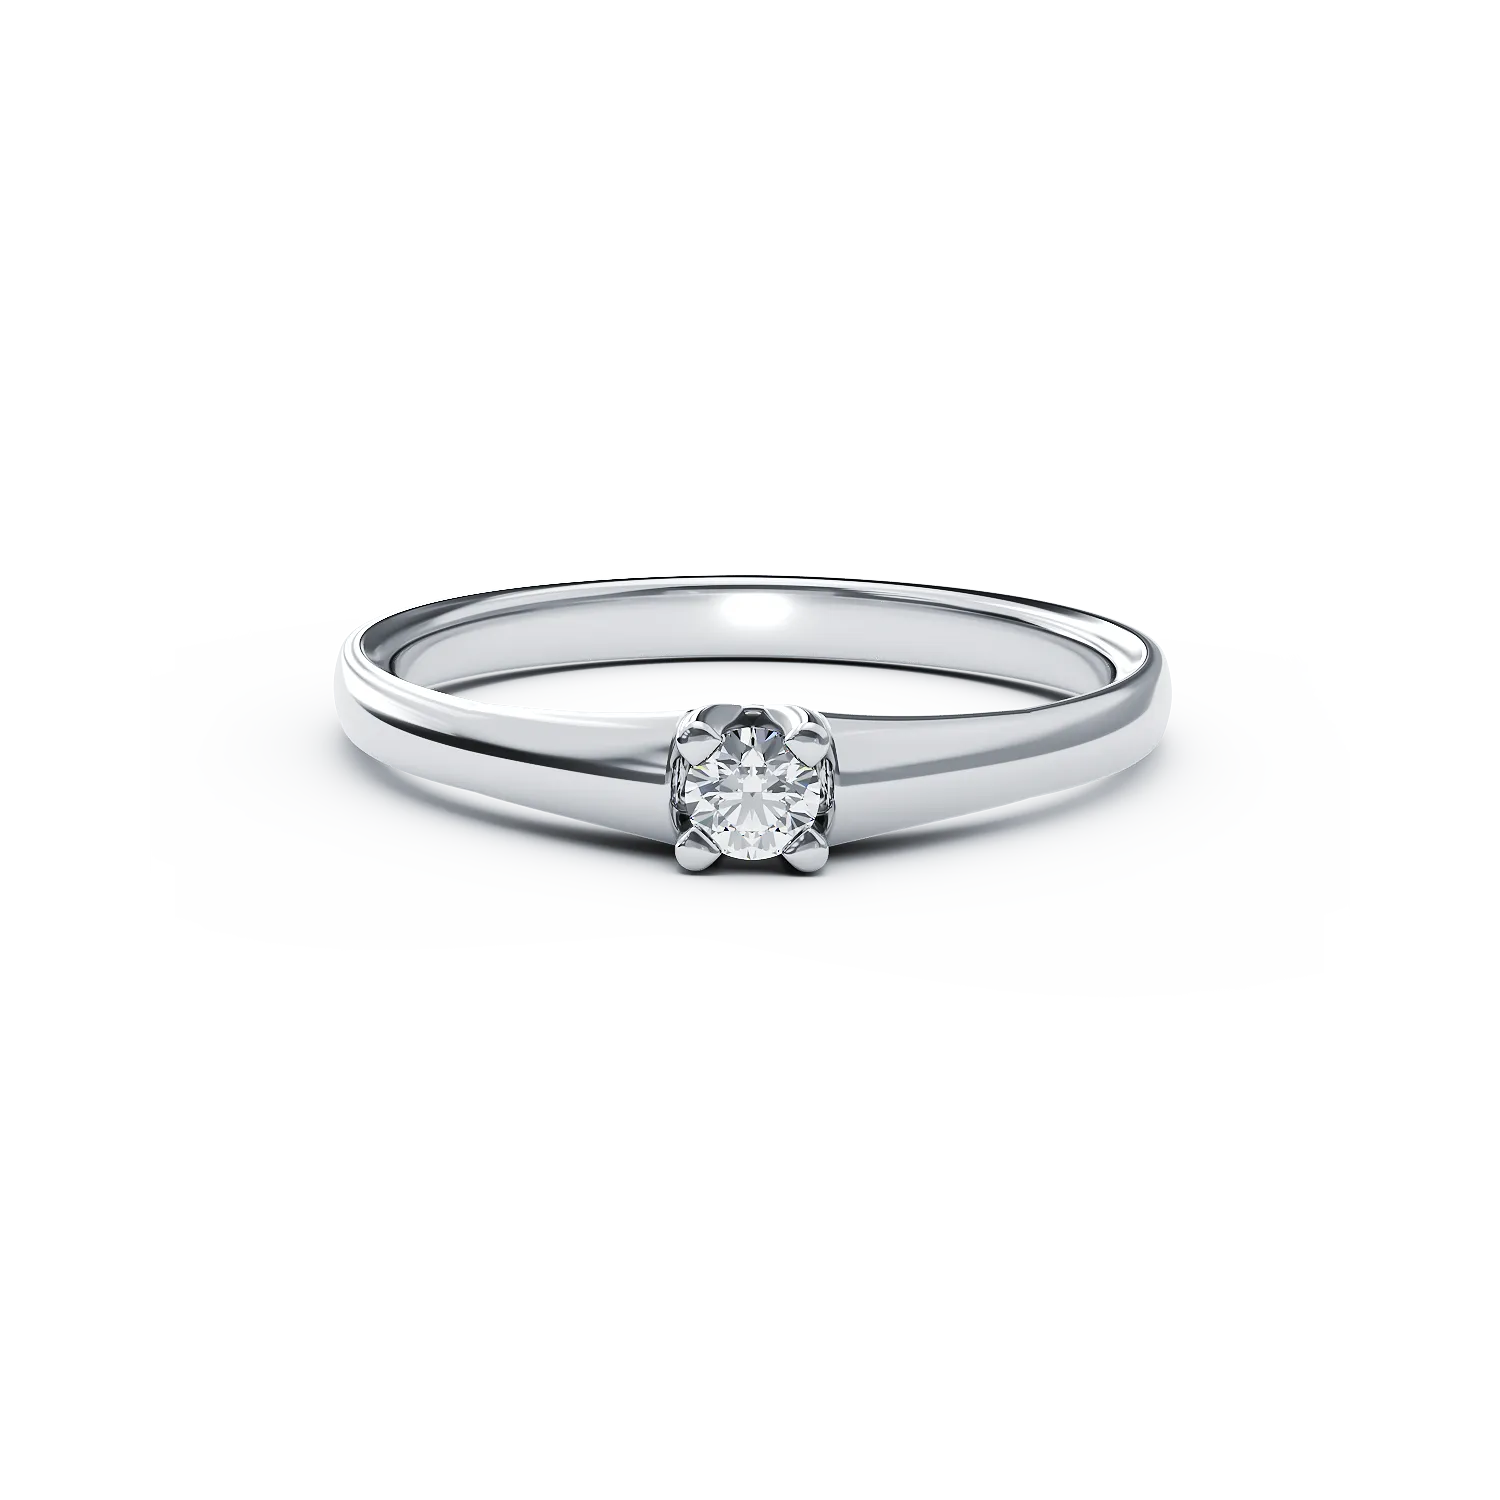 White gold engagement ring with 0.094ct solitaire diamond